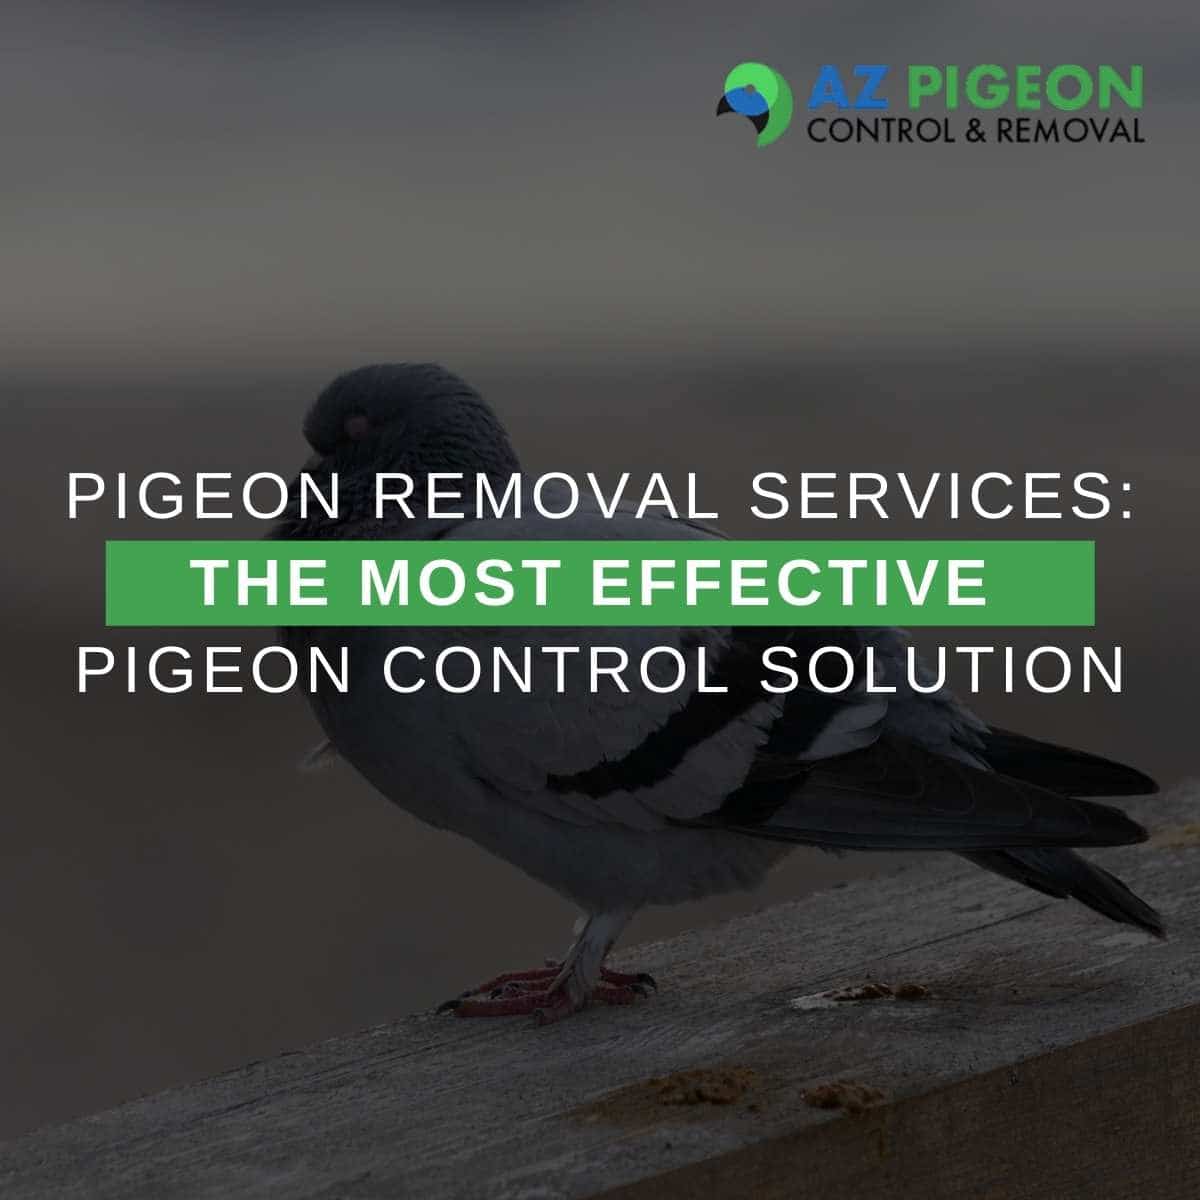 Pigeon Removal Services: The Most Effective Pigeon Control Solution